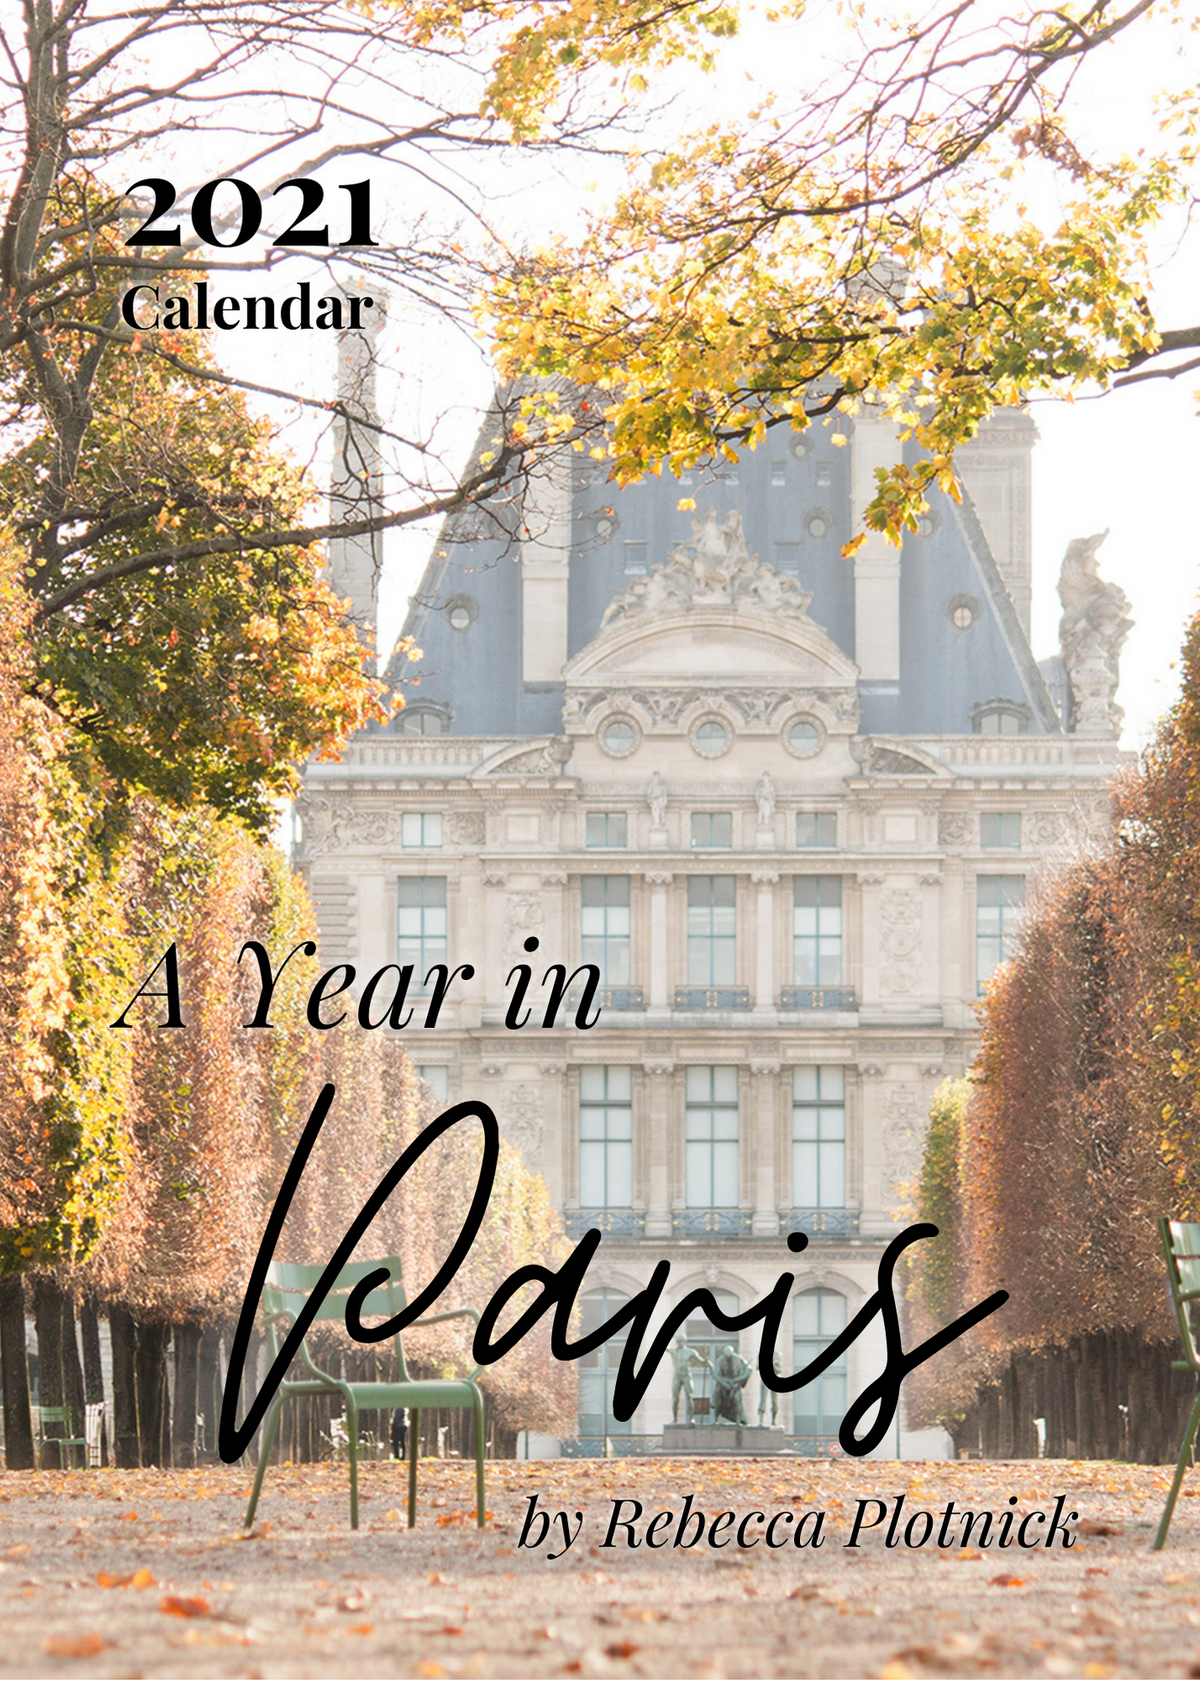 A Year in Paris 2021 Calendar and Notecard Set of 5